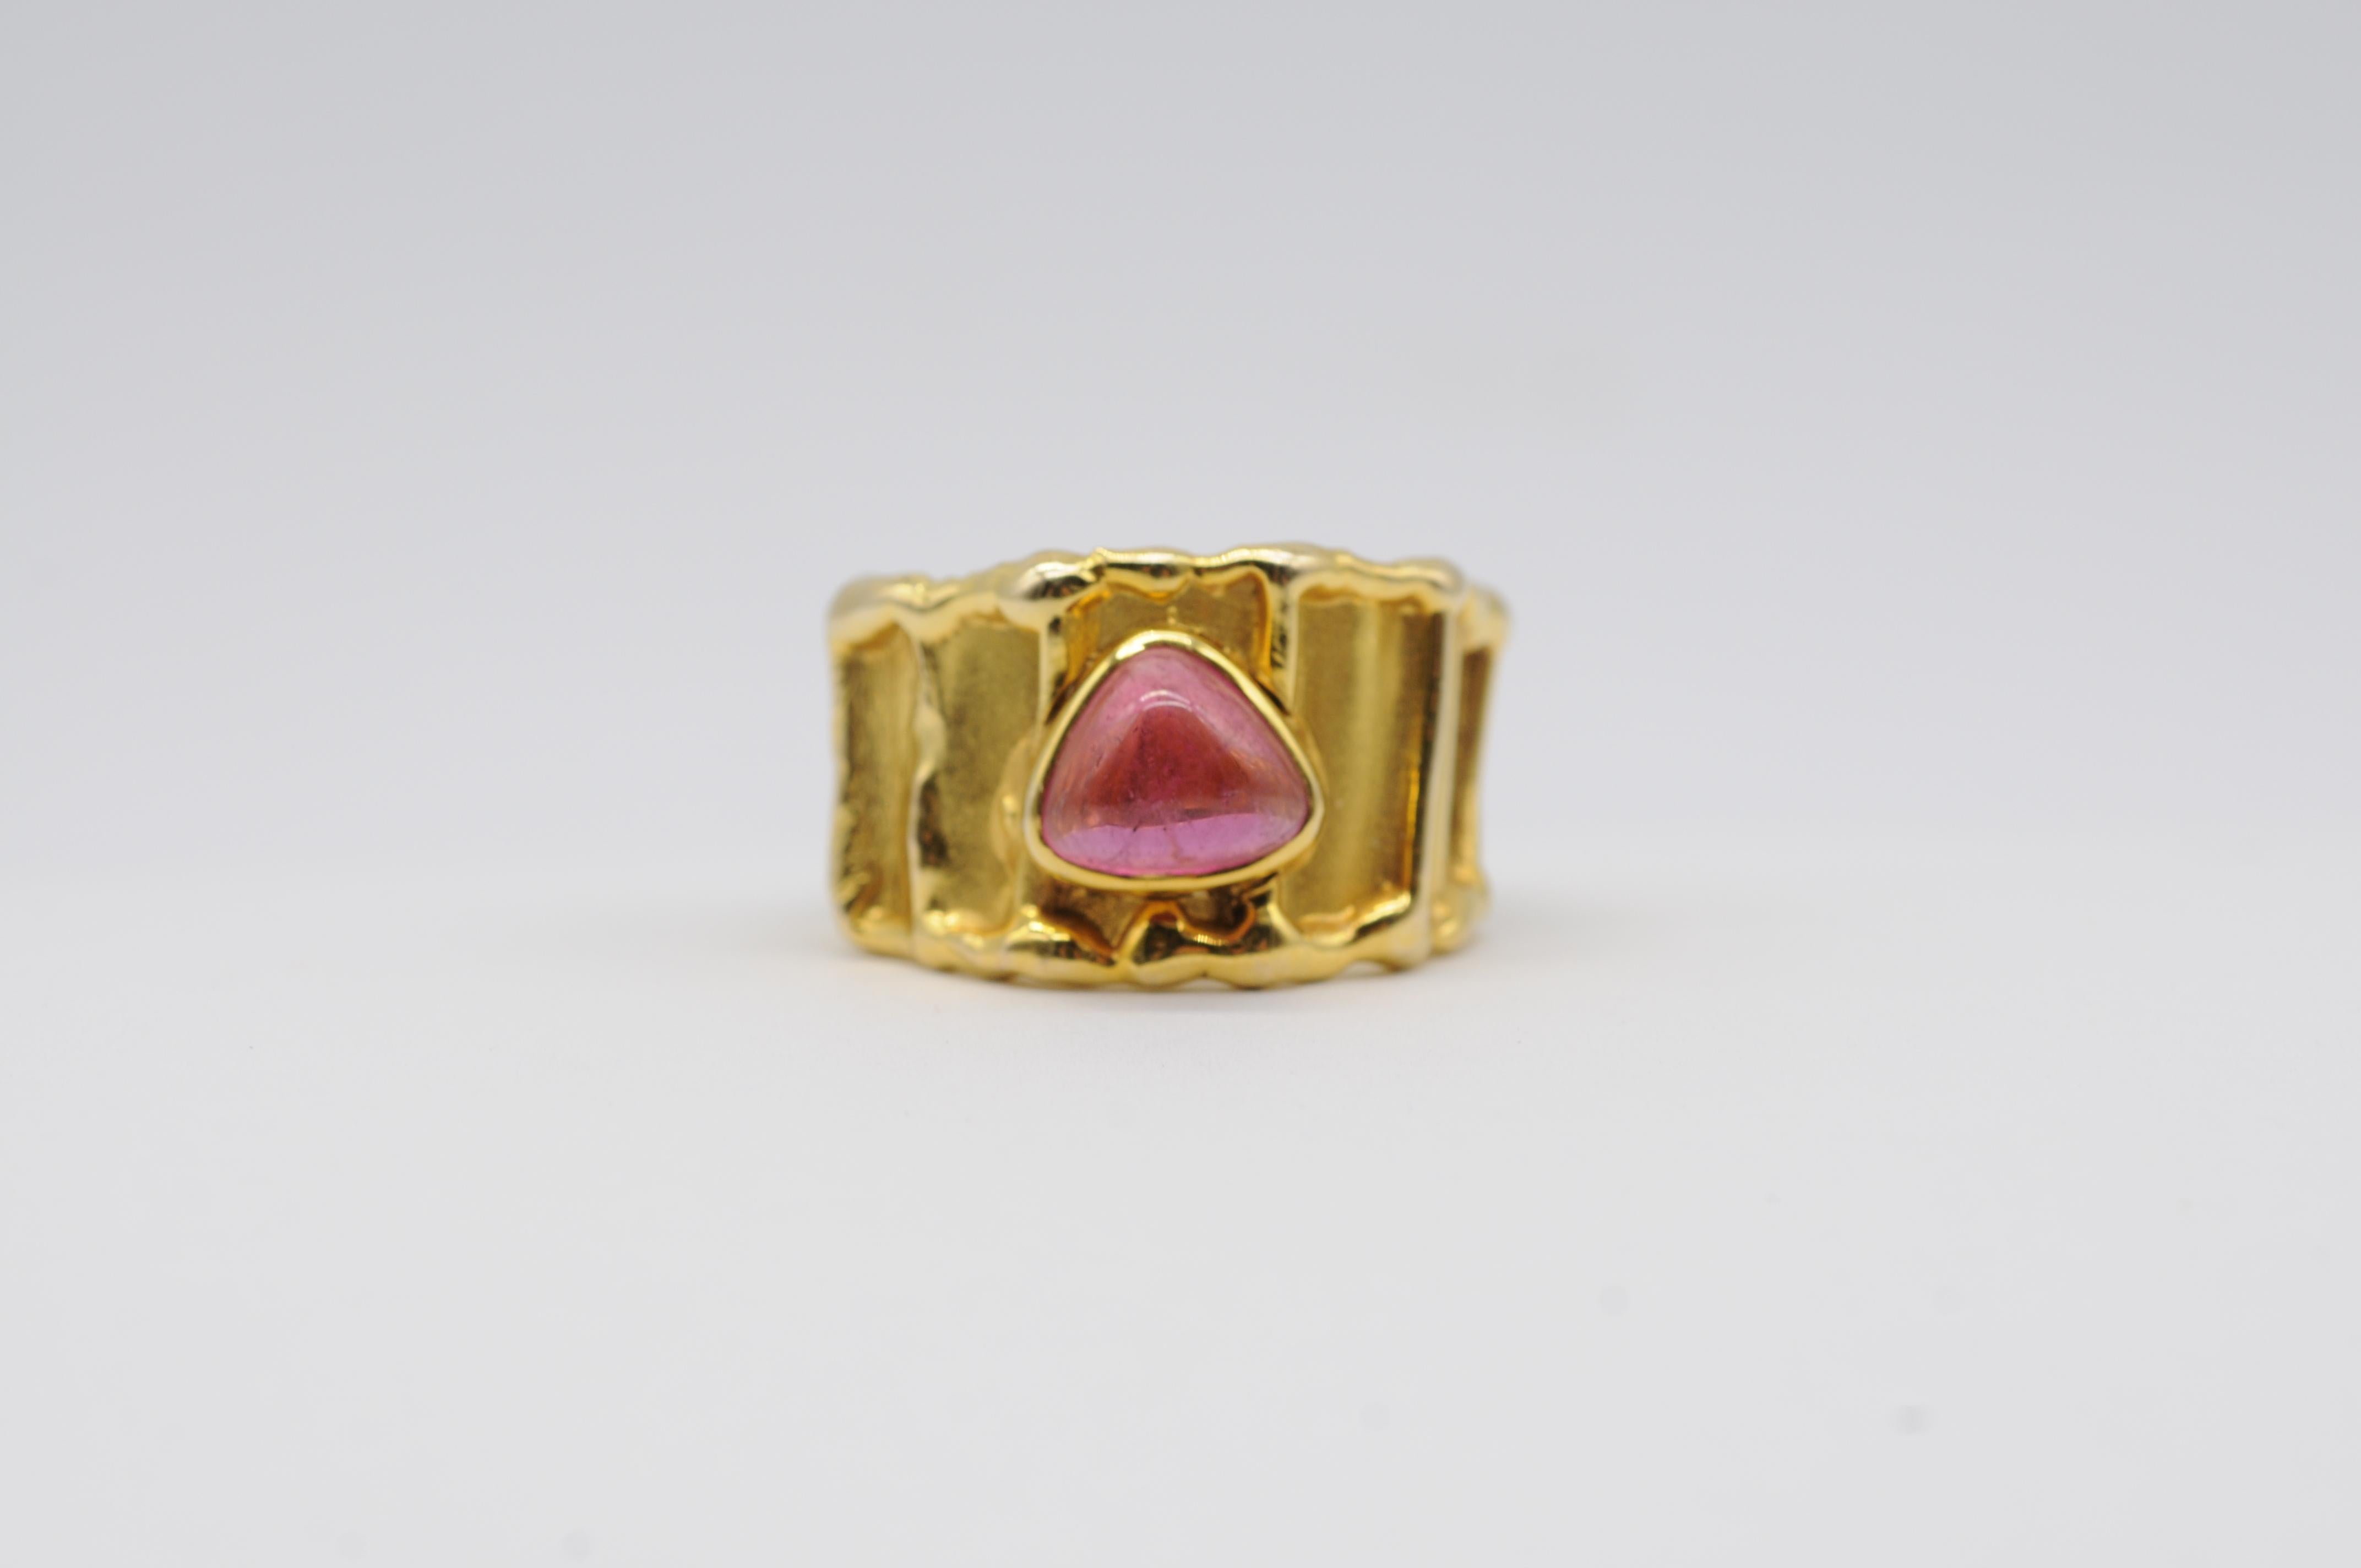 Immerse yourself in the captivating allure of this exquisite red tourmaline ring, embraced by an intricate 14k yellow gold setting that exudes elegance and refinement. This stunning ring epitomizes everything that defines aesthetic beauty and